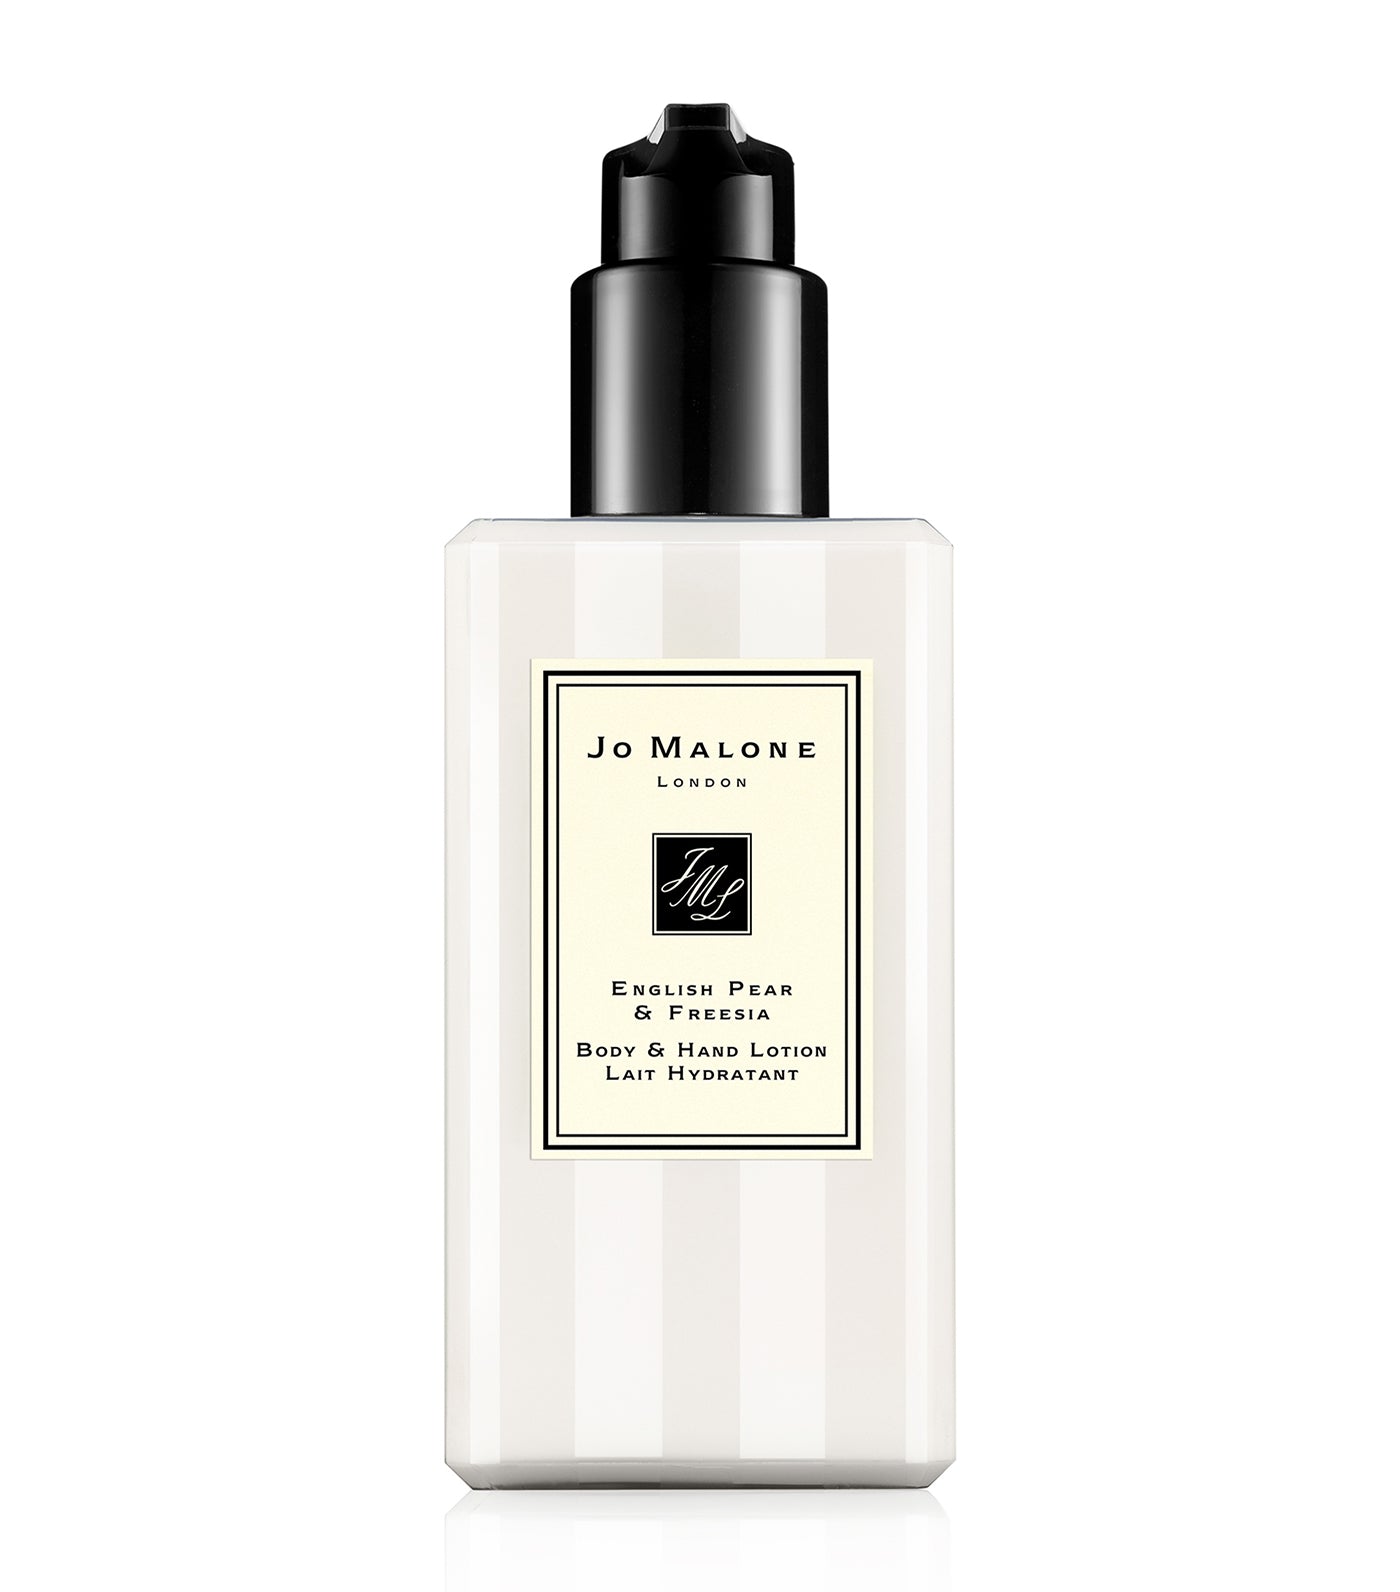 jo malone london english pear and freesia body and hand lotion